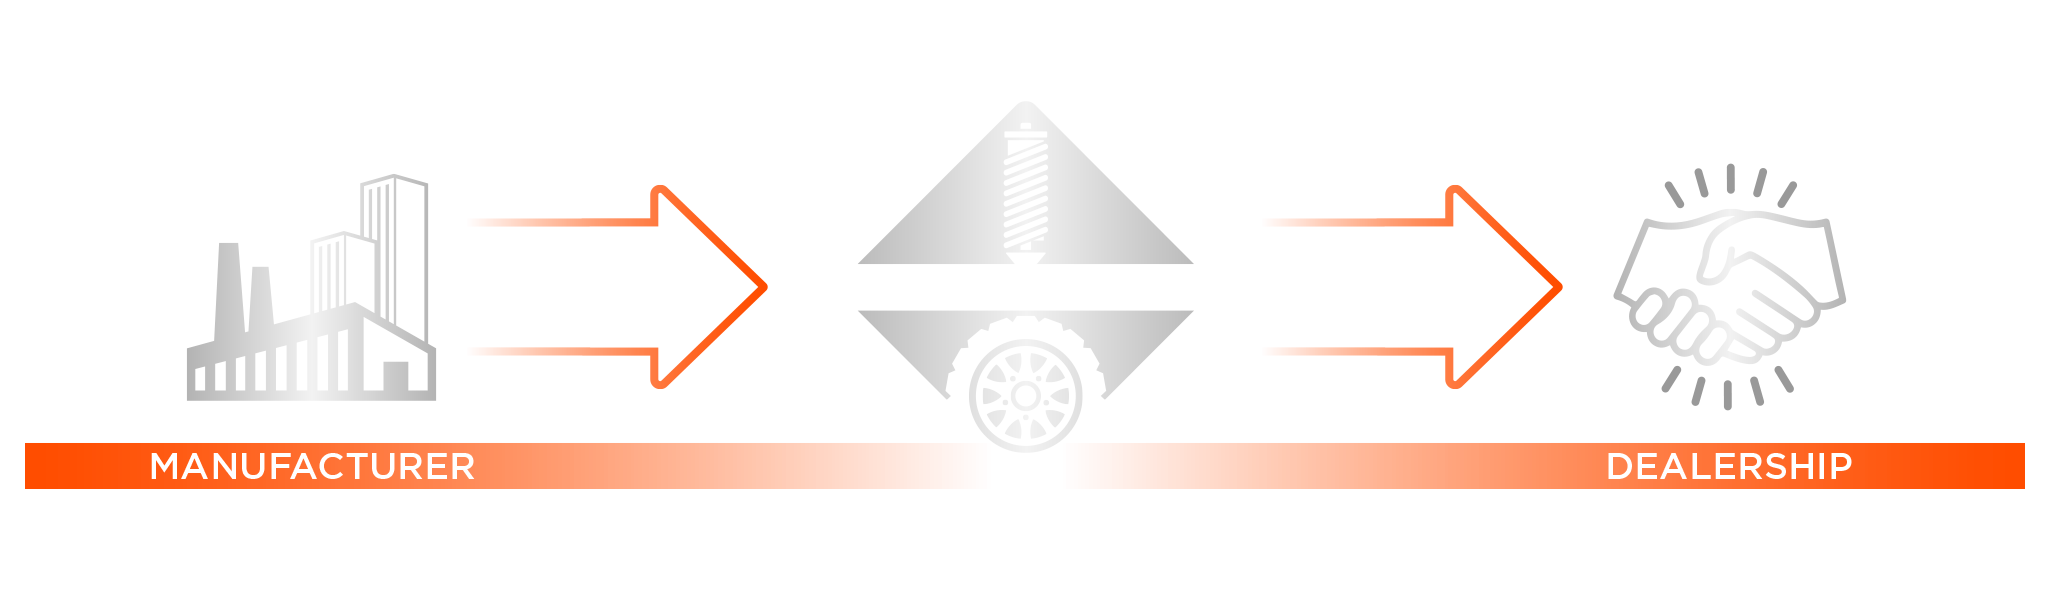 How the process works